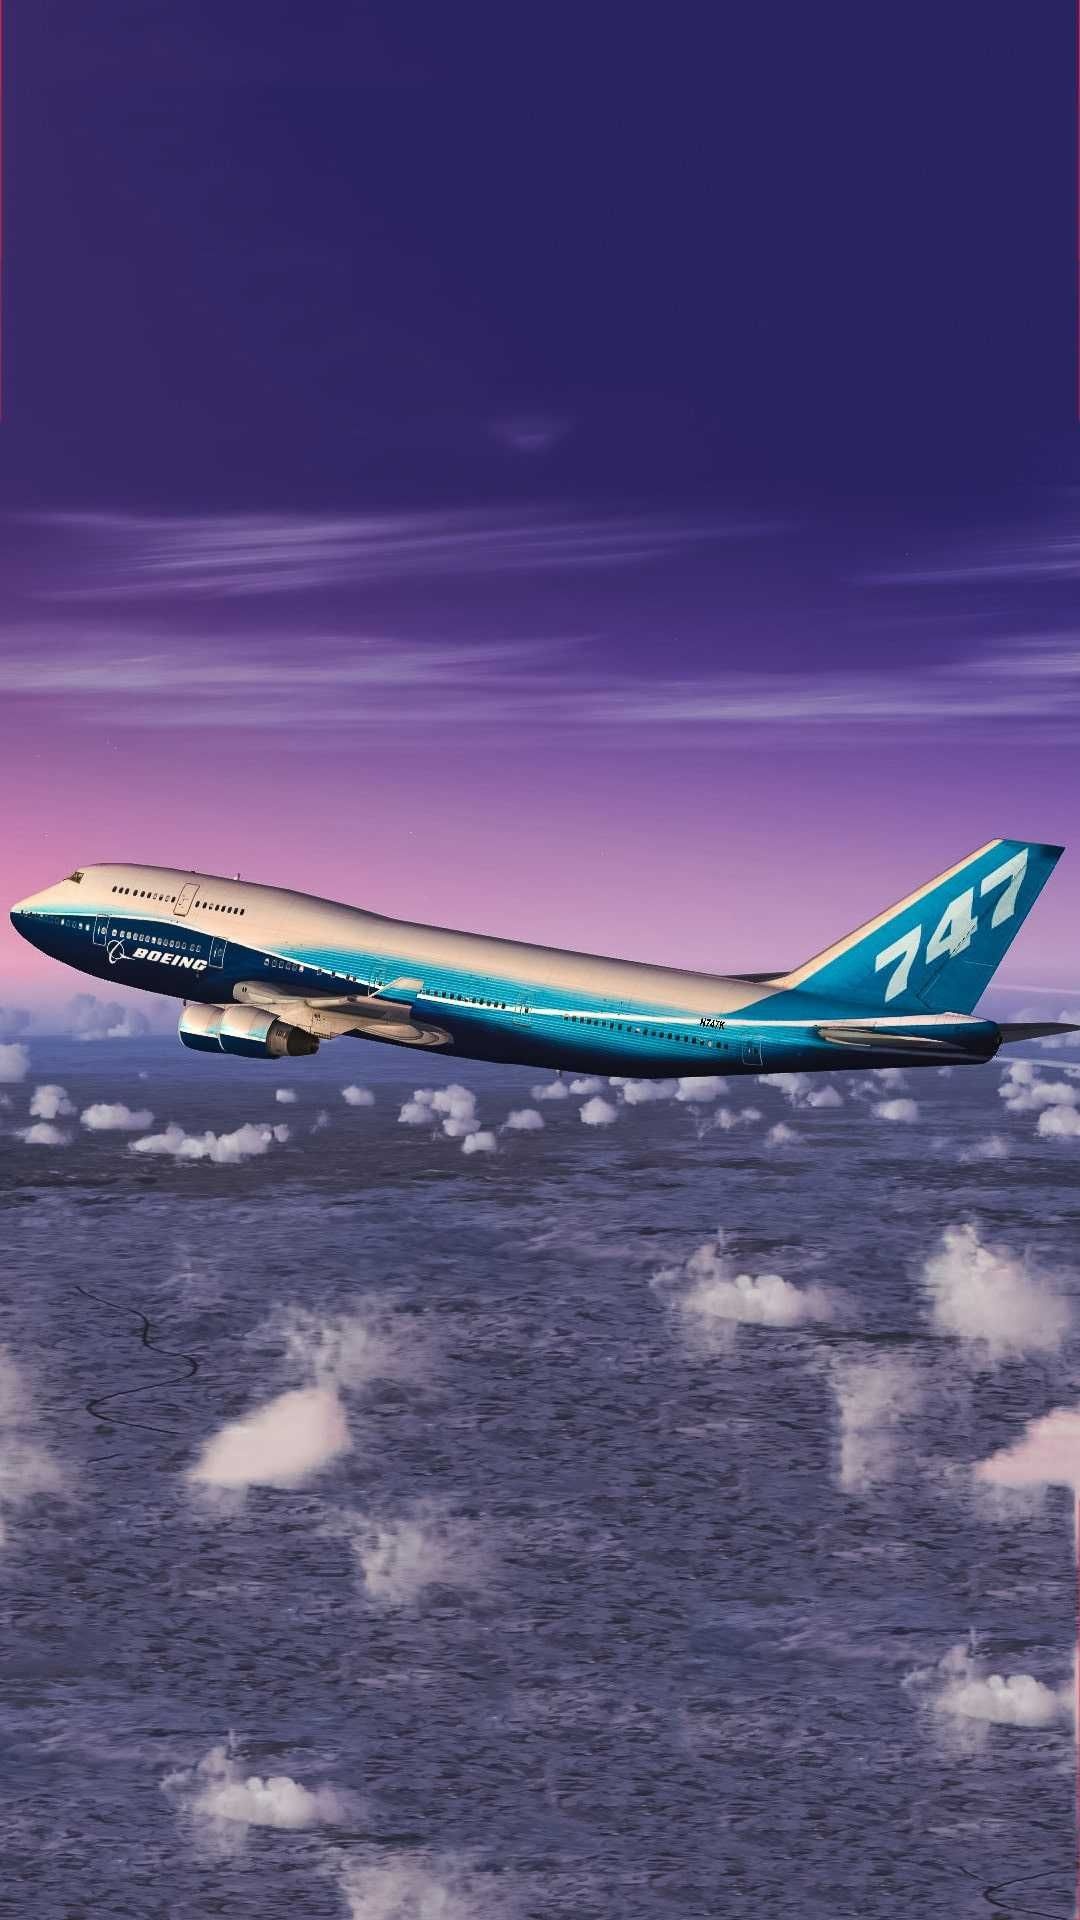 Aircraft: Boeing 747, Heavier-than-air aeroplane, Airliner. 1080x1920 Full HD Background.